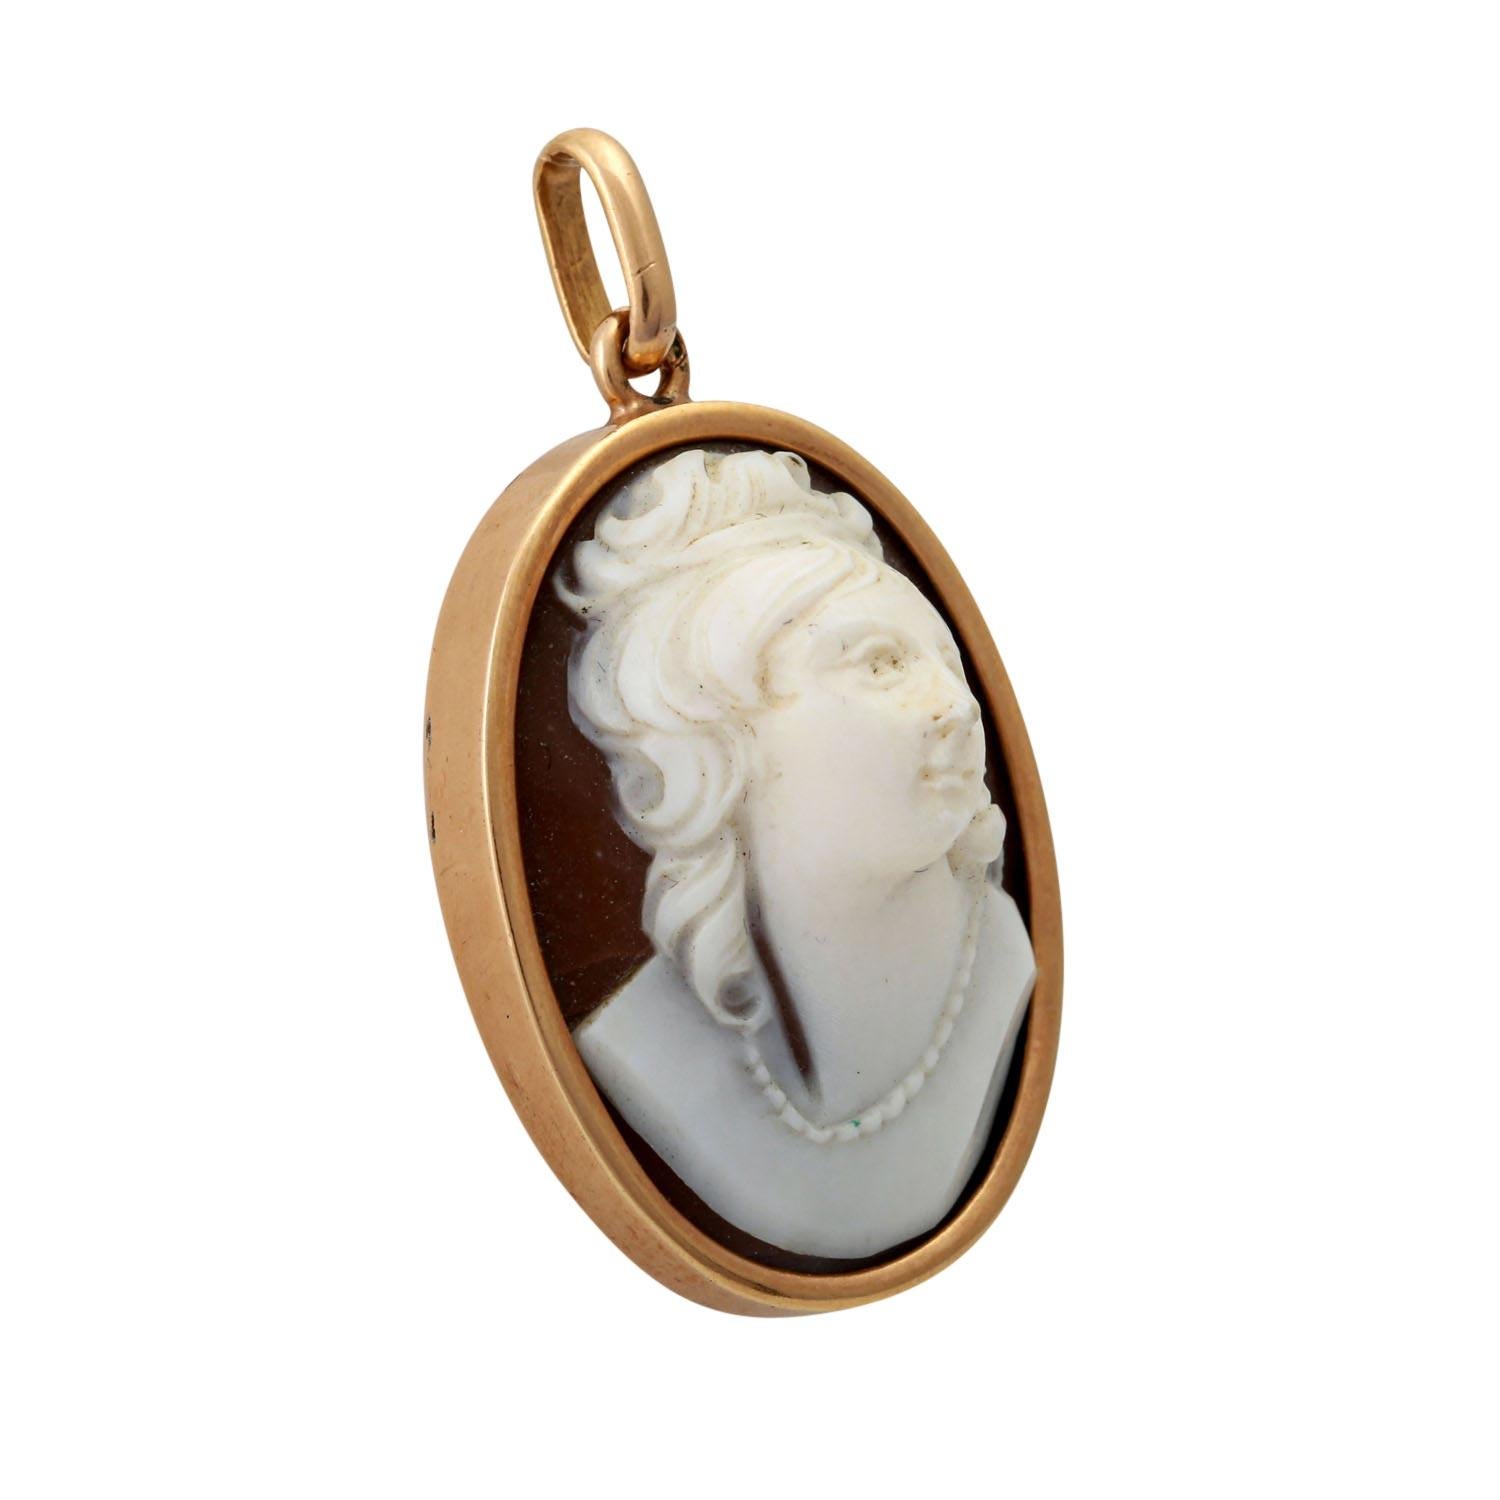 Highly plastic portrait of a romantic-looking lady, 18K rose gold, 9 g, approx. 4x2.2 cm, around 1890, slight signs of wear, clear design.



 Pendant/brooch with shell cameo, very plastic depiction of a romantic lady, 18K rose gold, 9 g, ca. 4x2.2